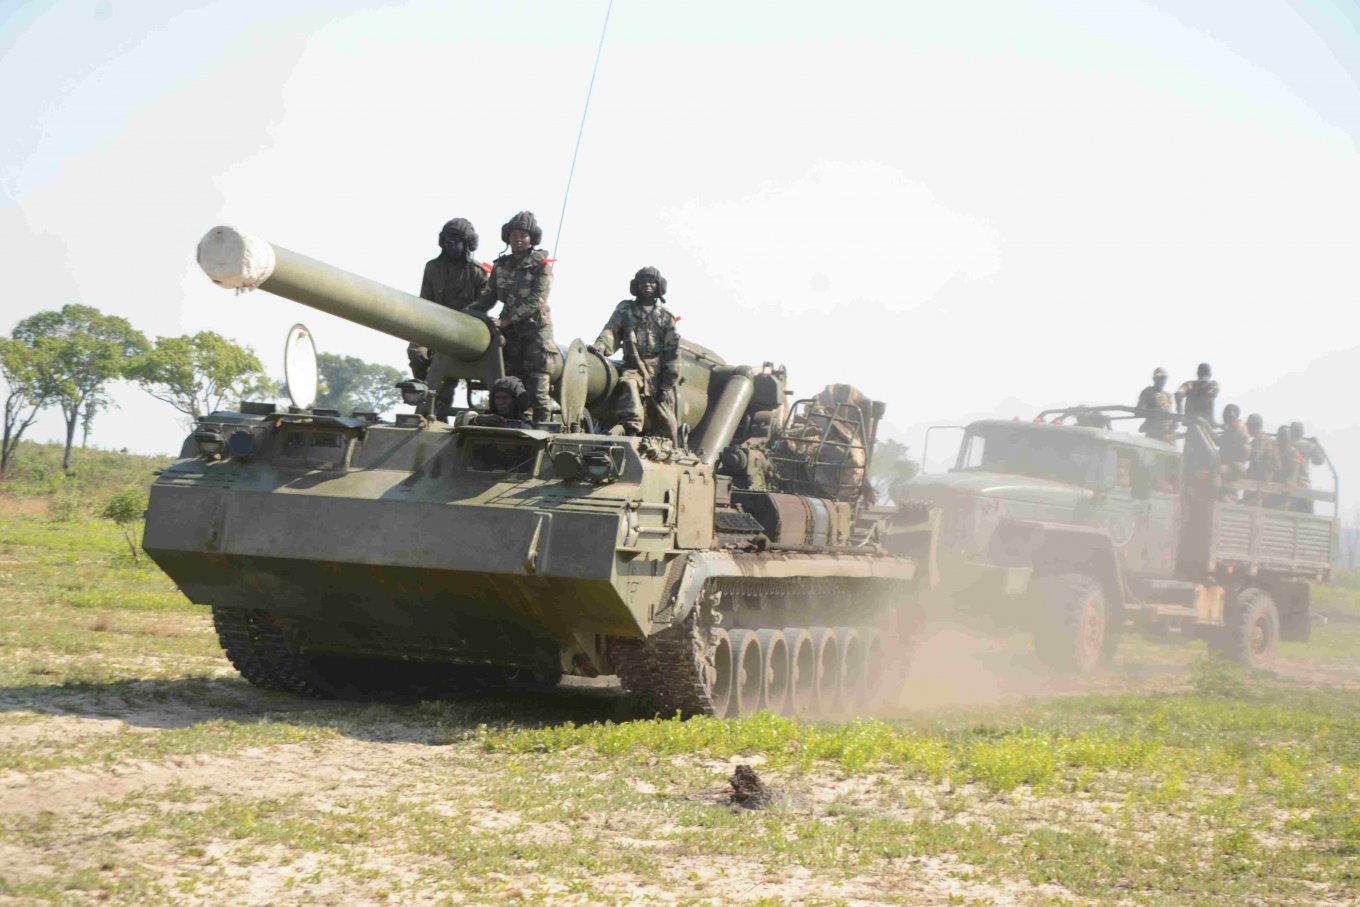 2C7 Pion self-propelled 203mm cannon of the armed forces of Angola, Angola Wants to Be the US Ally, Its Excess Soviet Weapons Can Help the Armed Forces of Ukraine, Defense Express